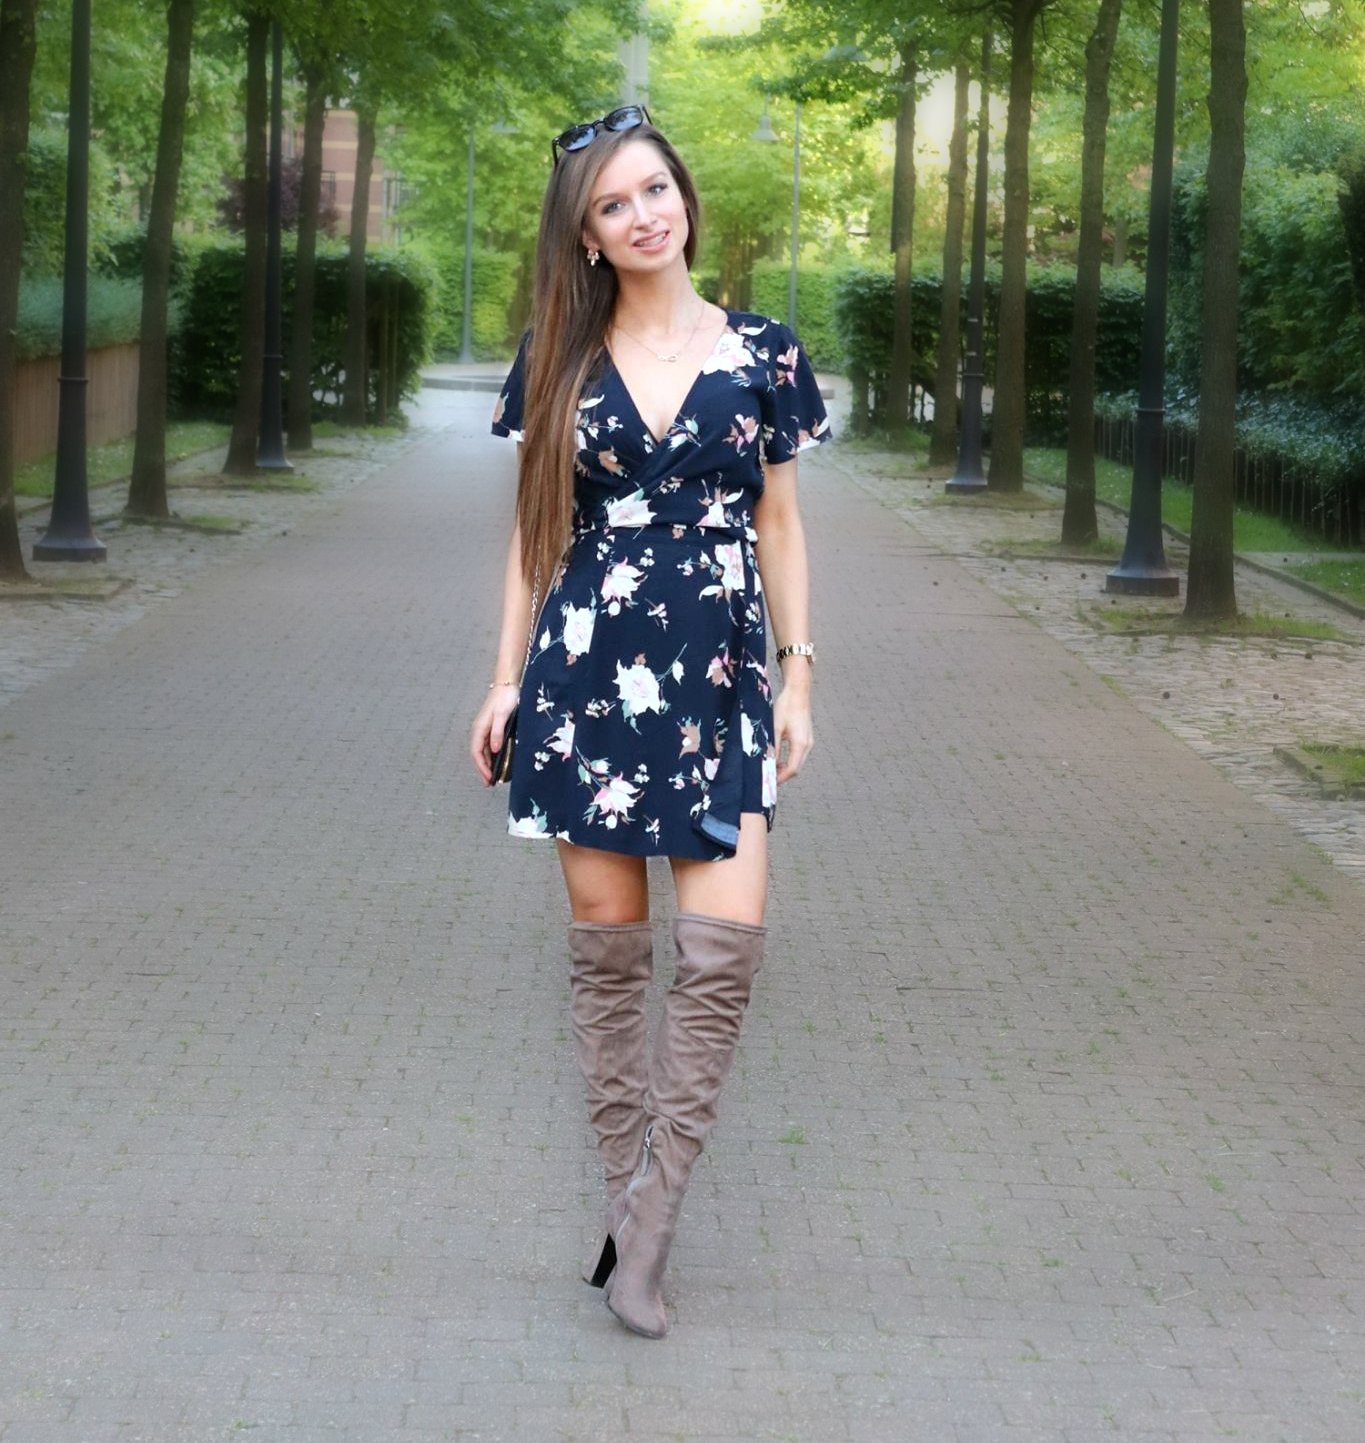 Abercrombie floral dress with over the knee boots and sunglasses